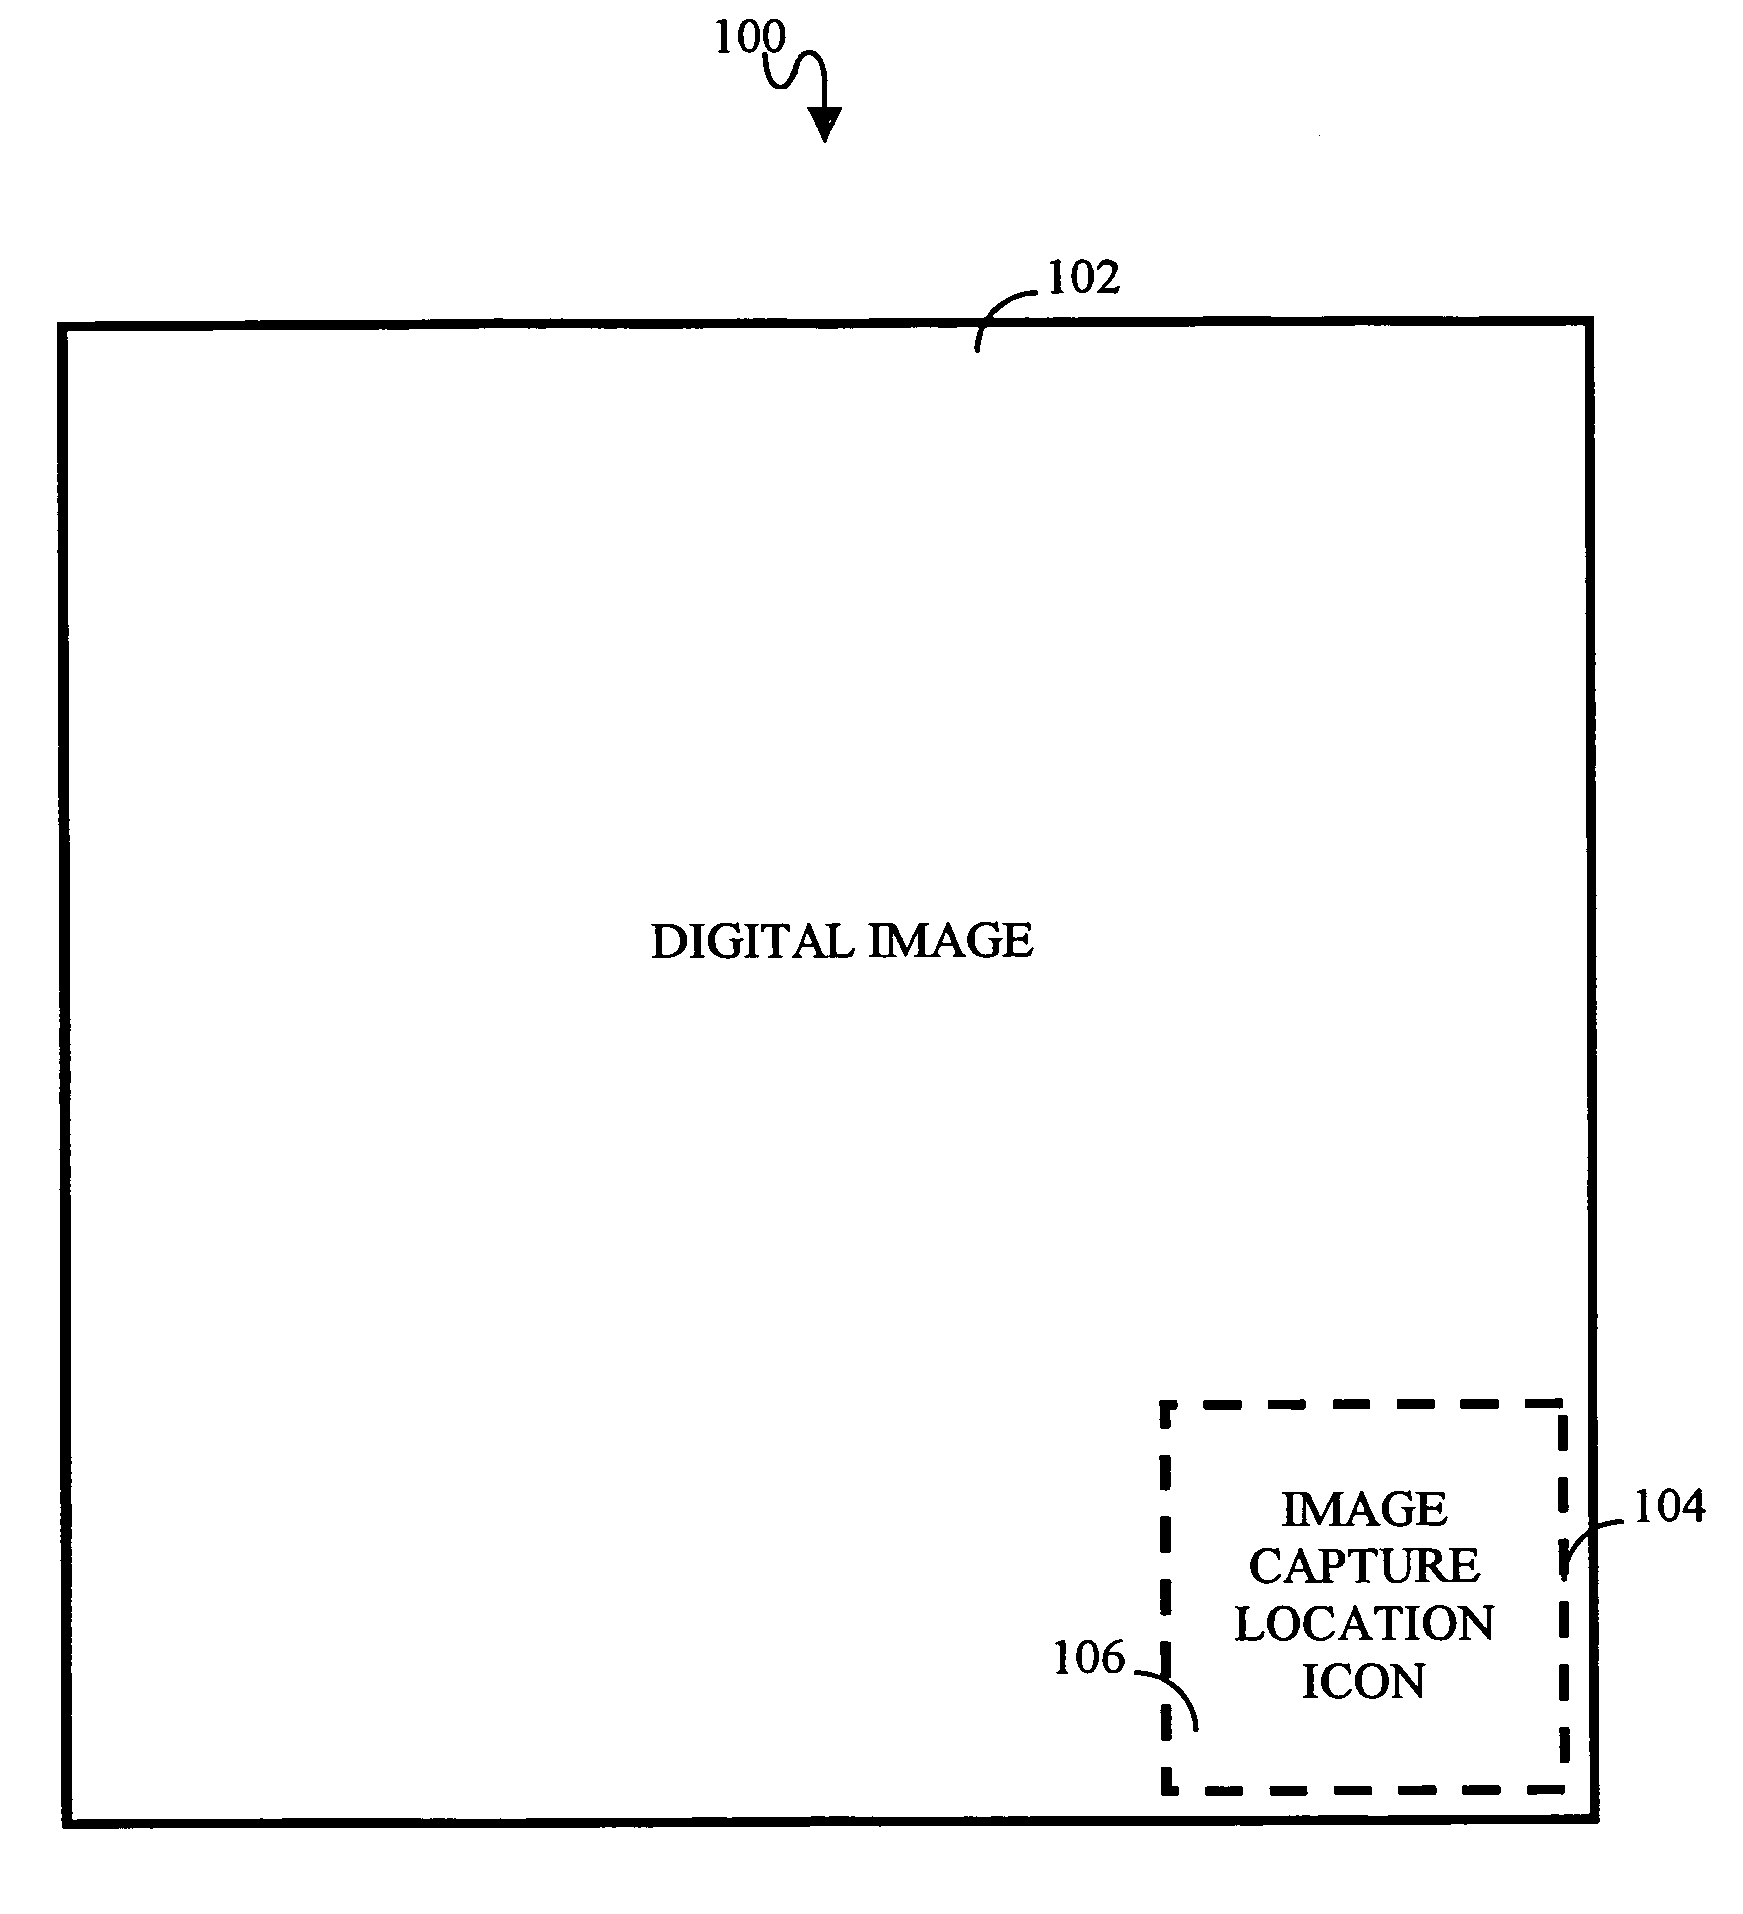 Method and apparatus for producing digital images with embedded image capture location icons